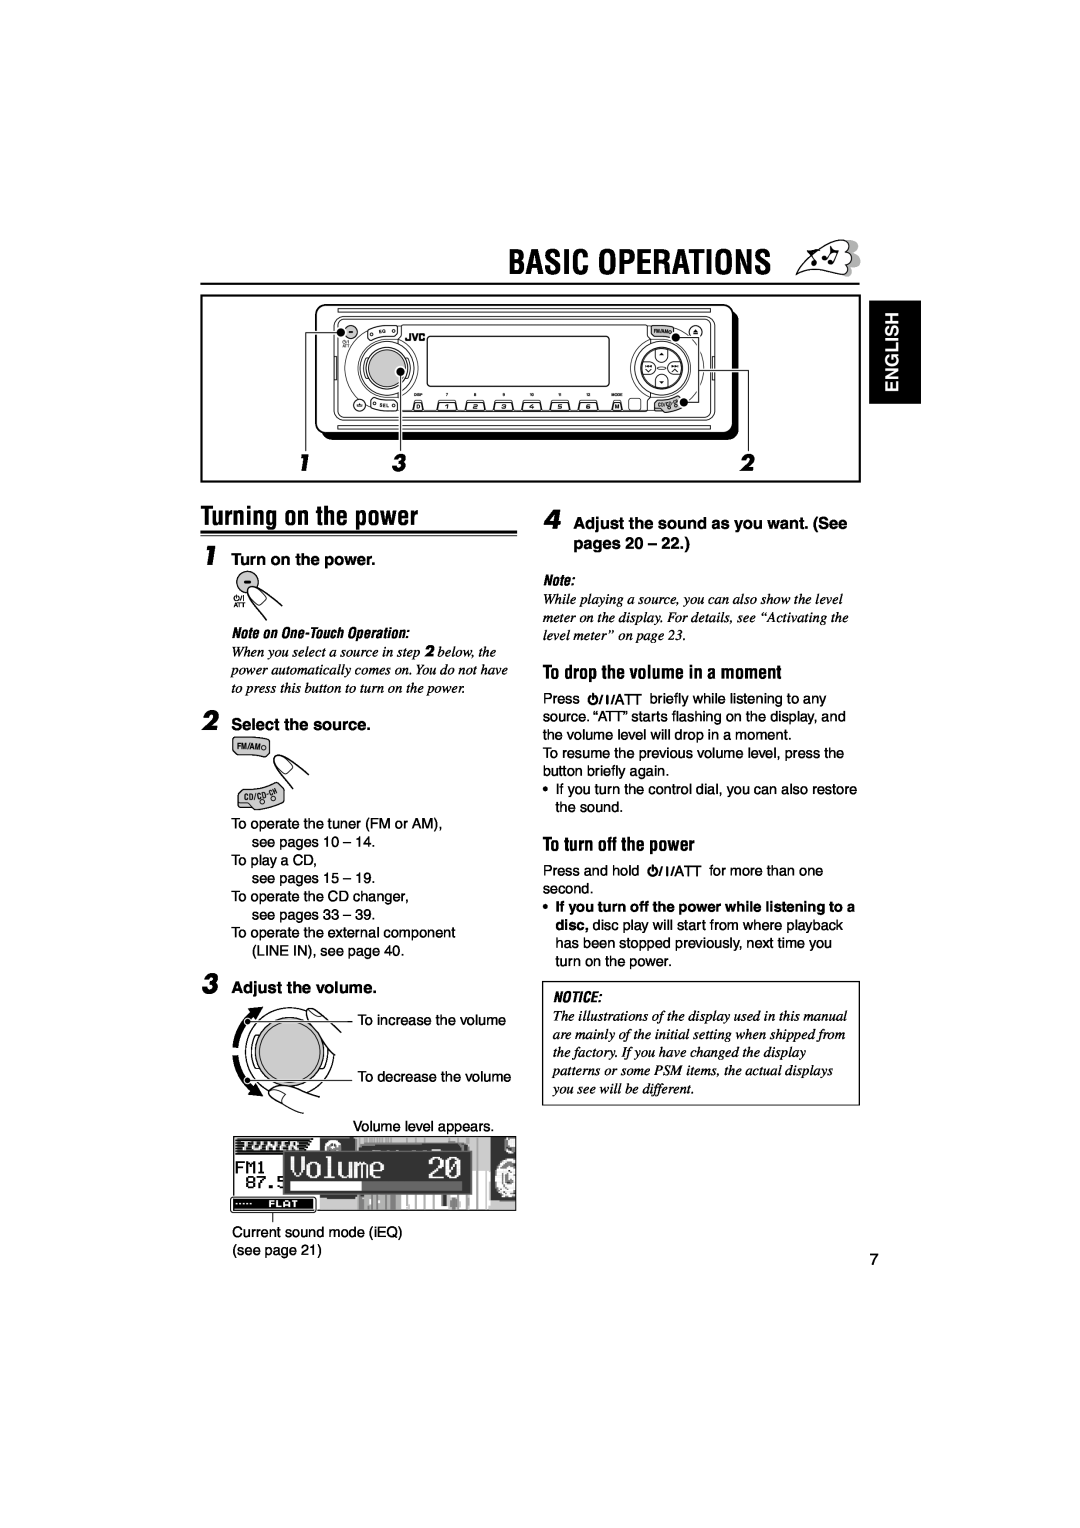 JVC KD-LH1100 manual Basic Operations, Turning on the power, English, To drop the volume in a moment, To turn off the power 